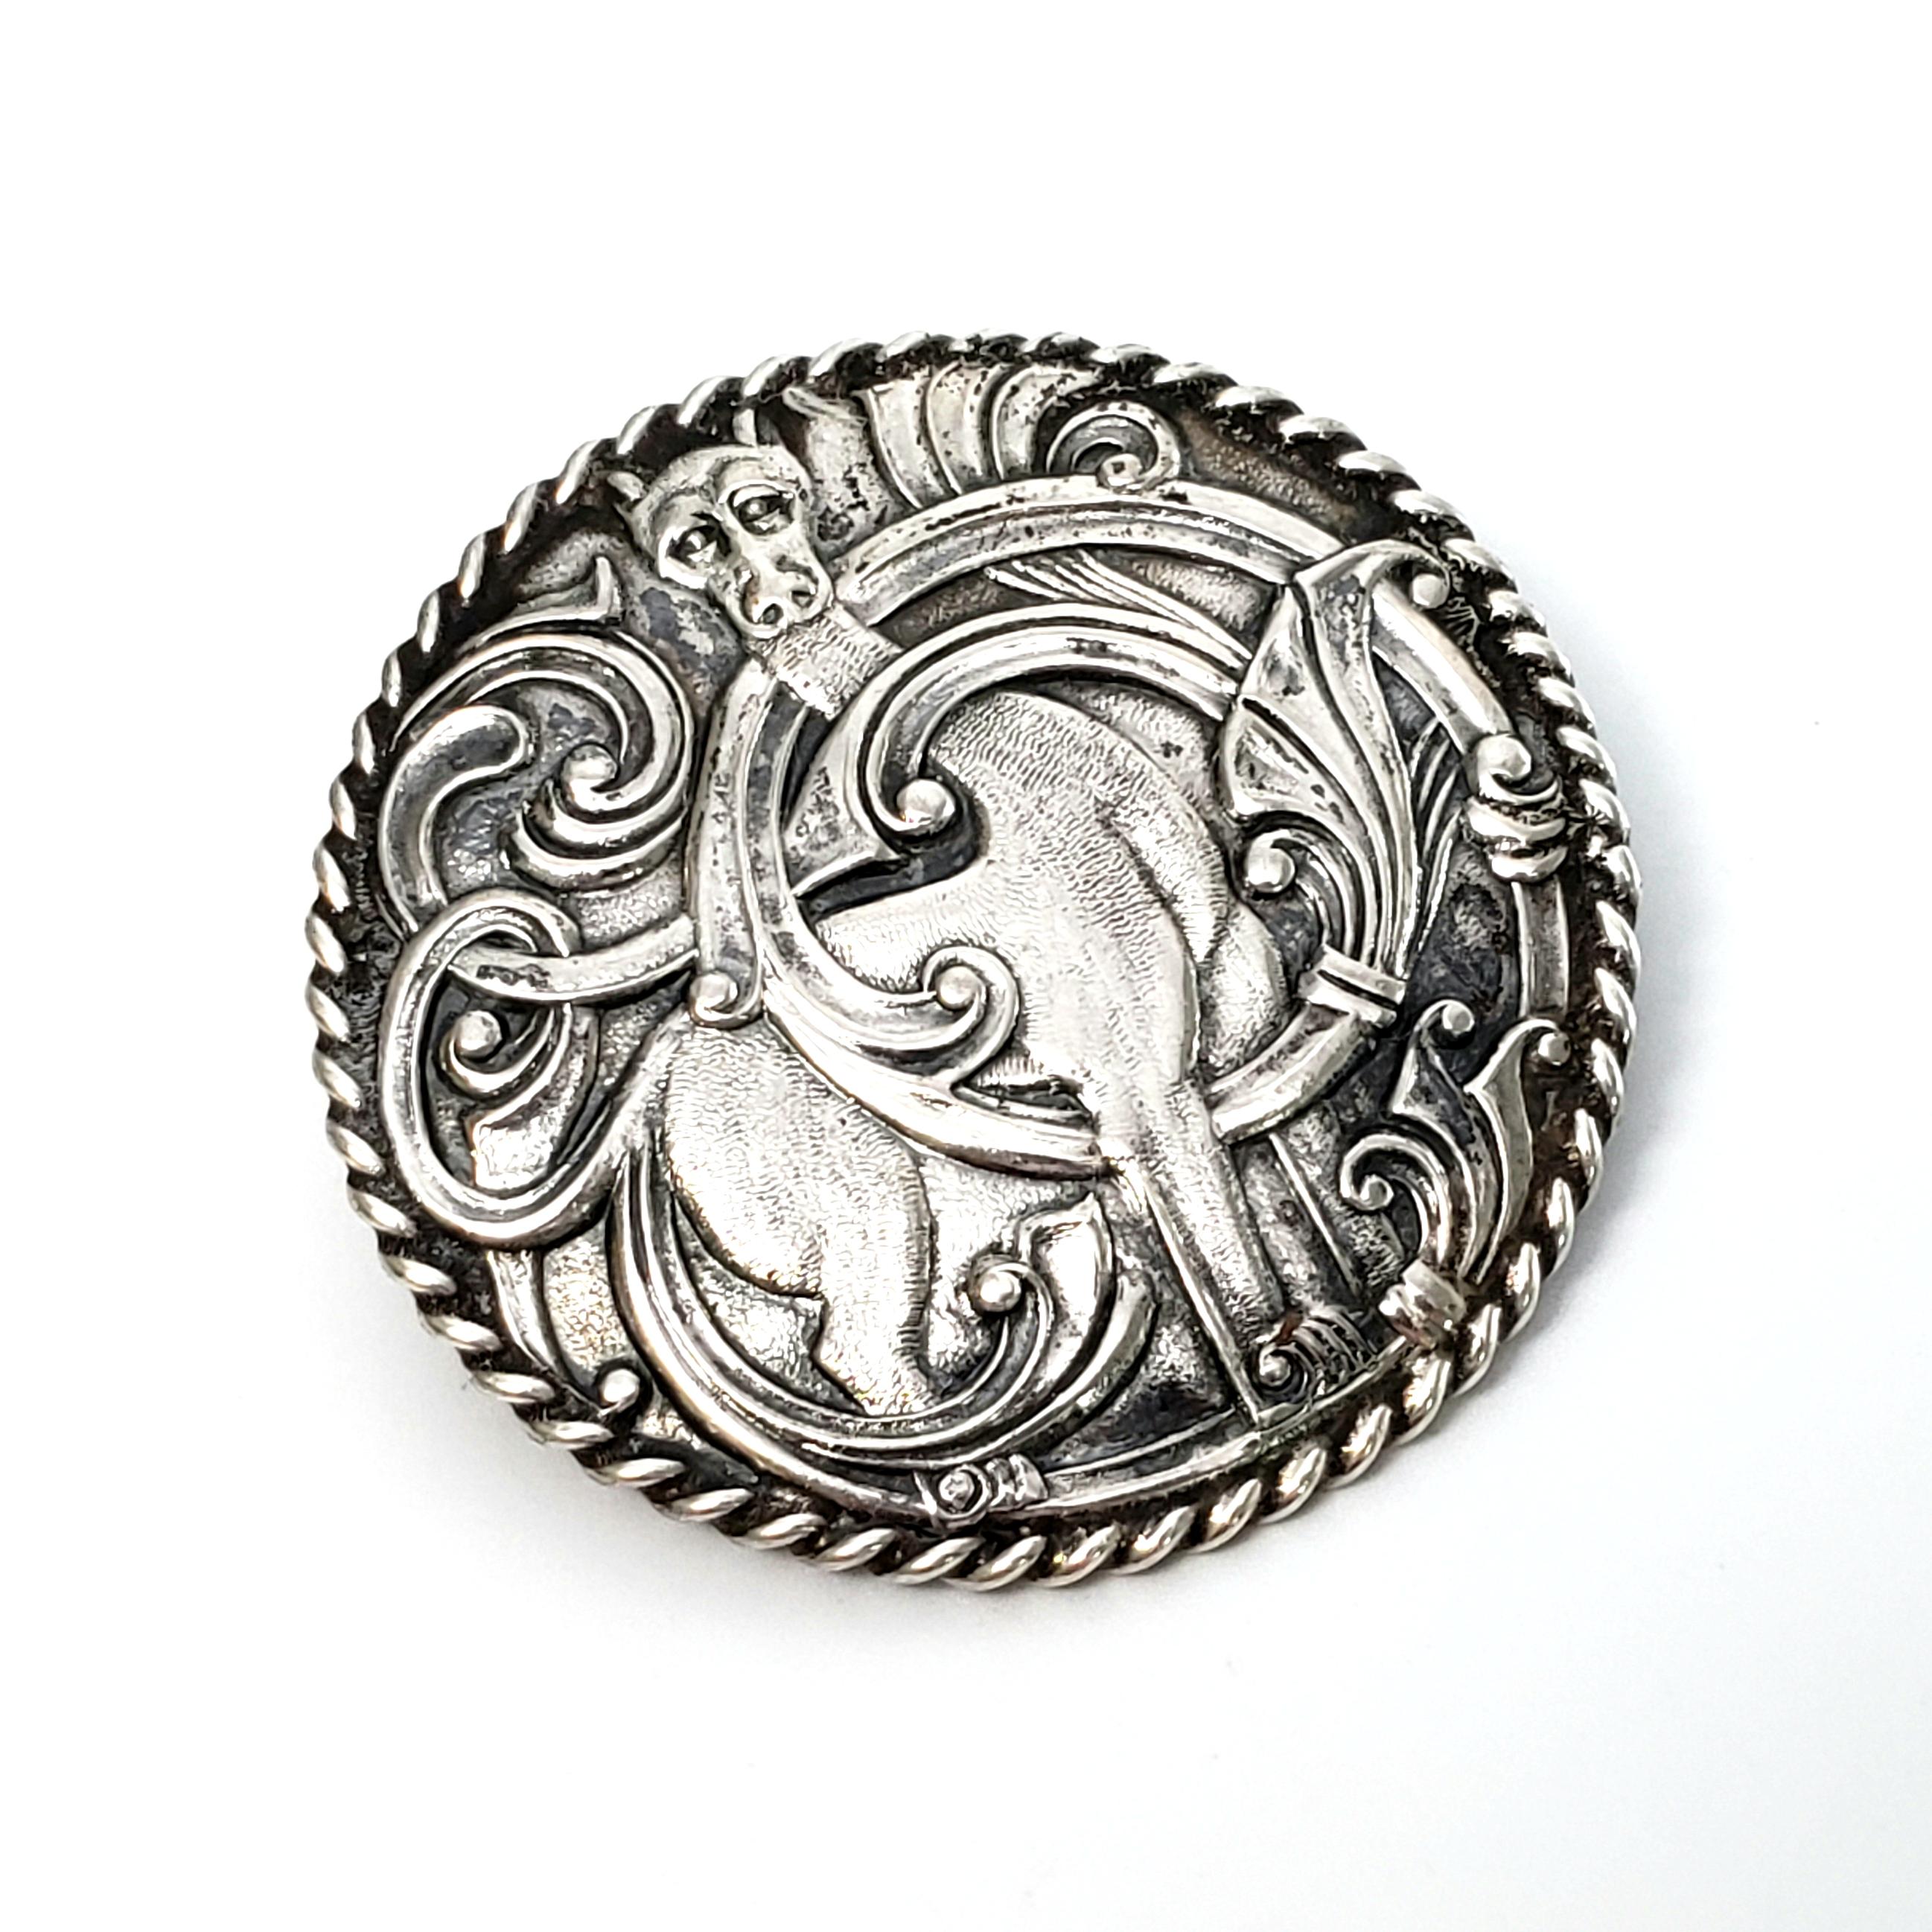 Vintage 830 silver Dragestil pin from Norway by Leif Gruer.

Nice example of the Dragestil, or 